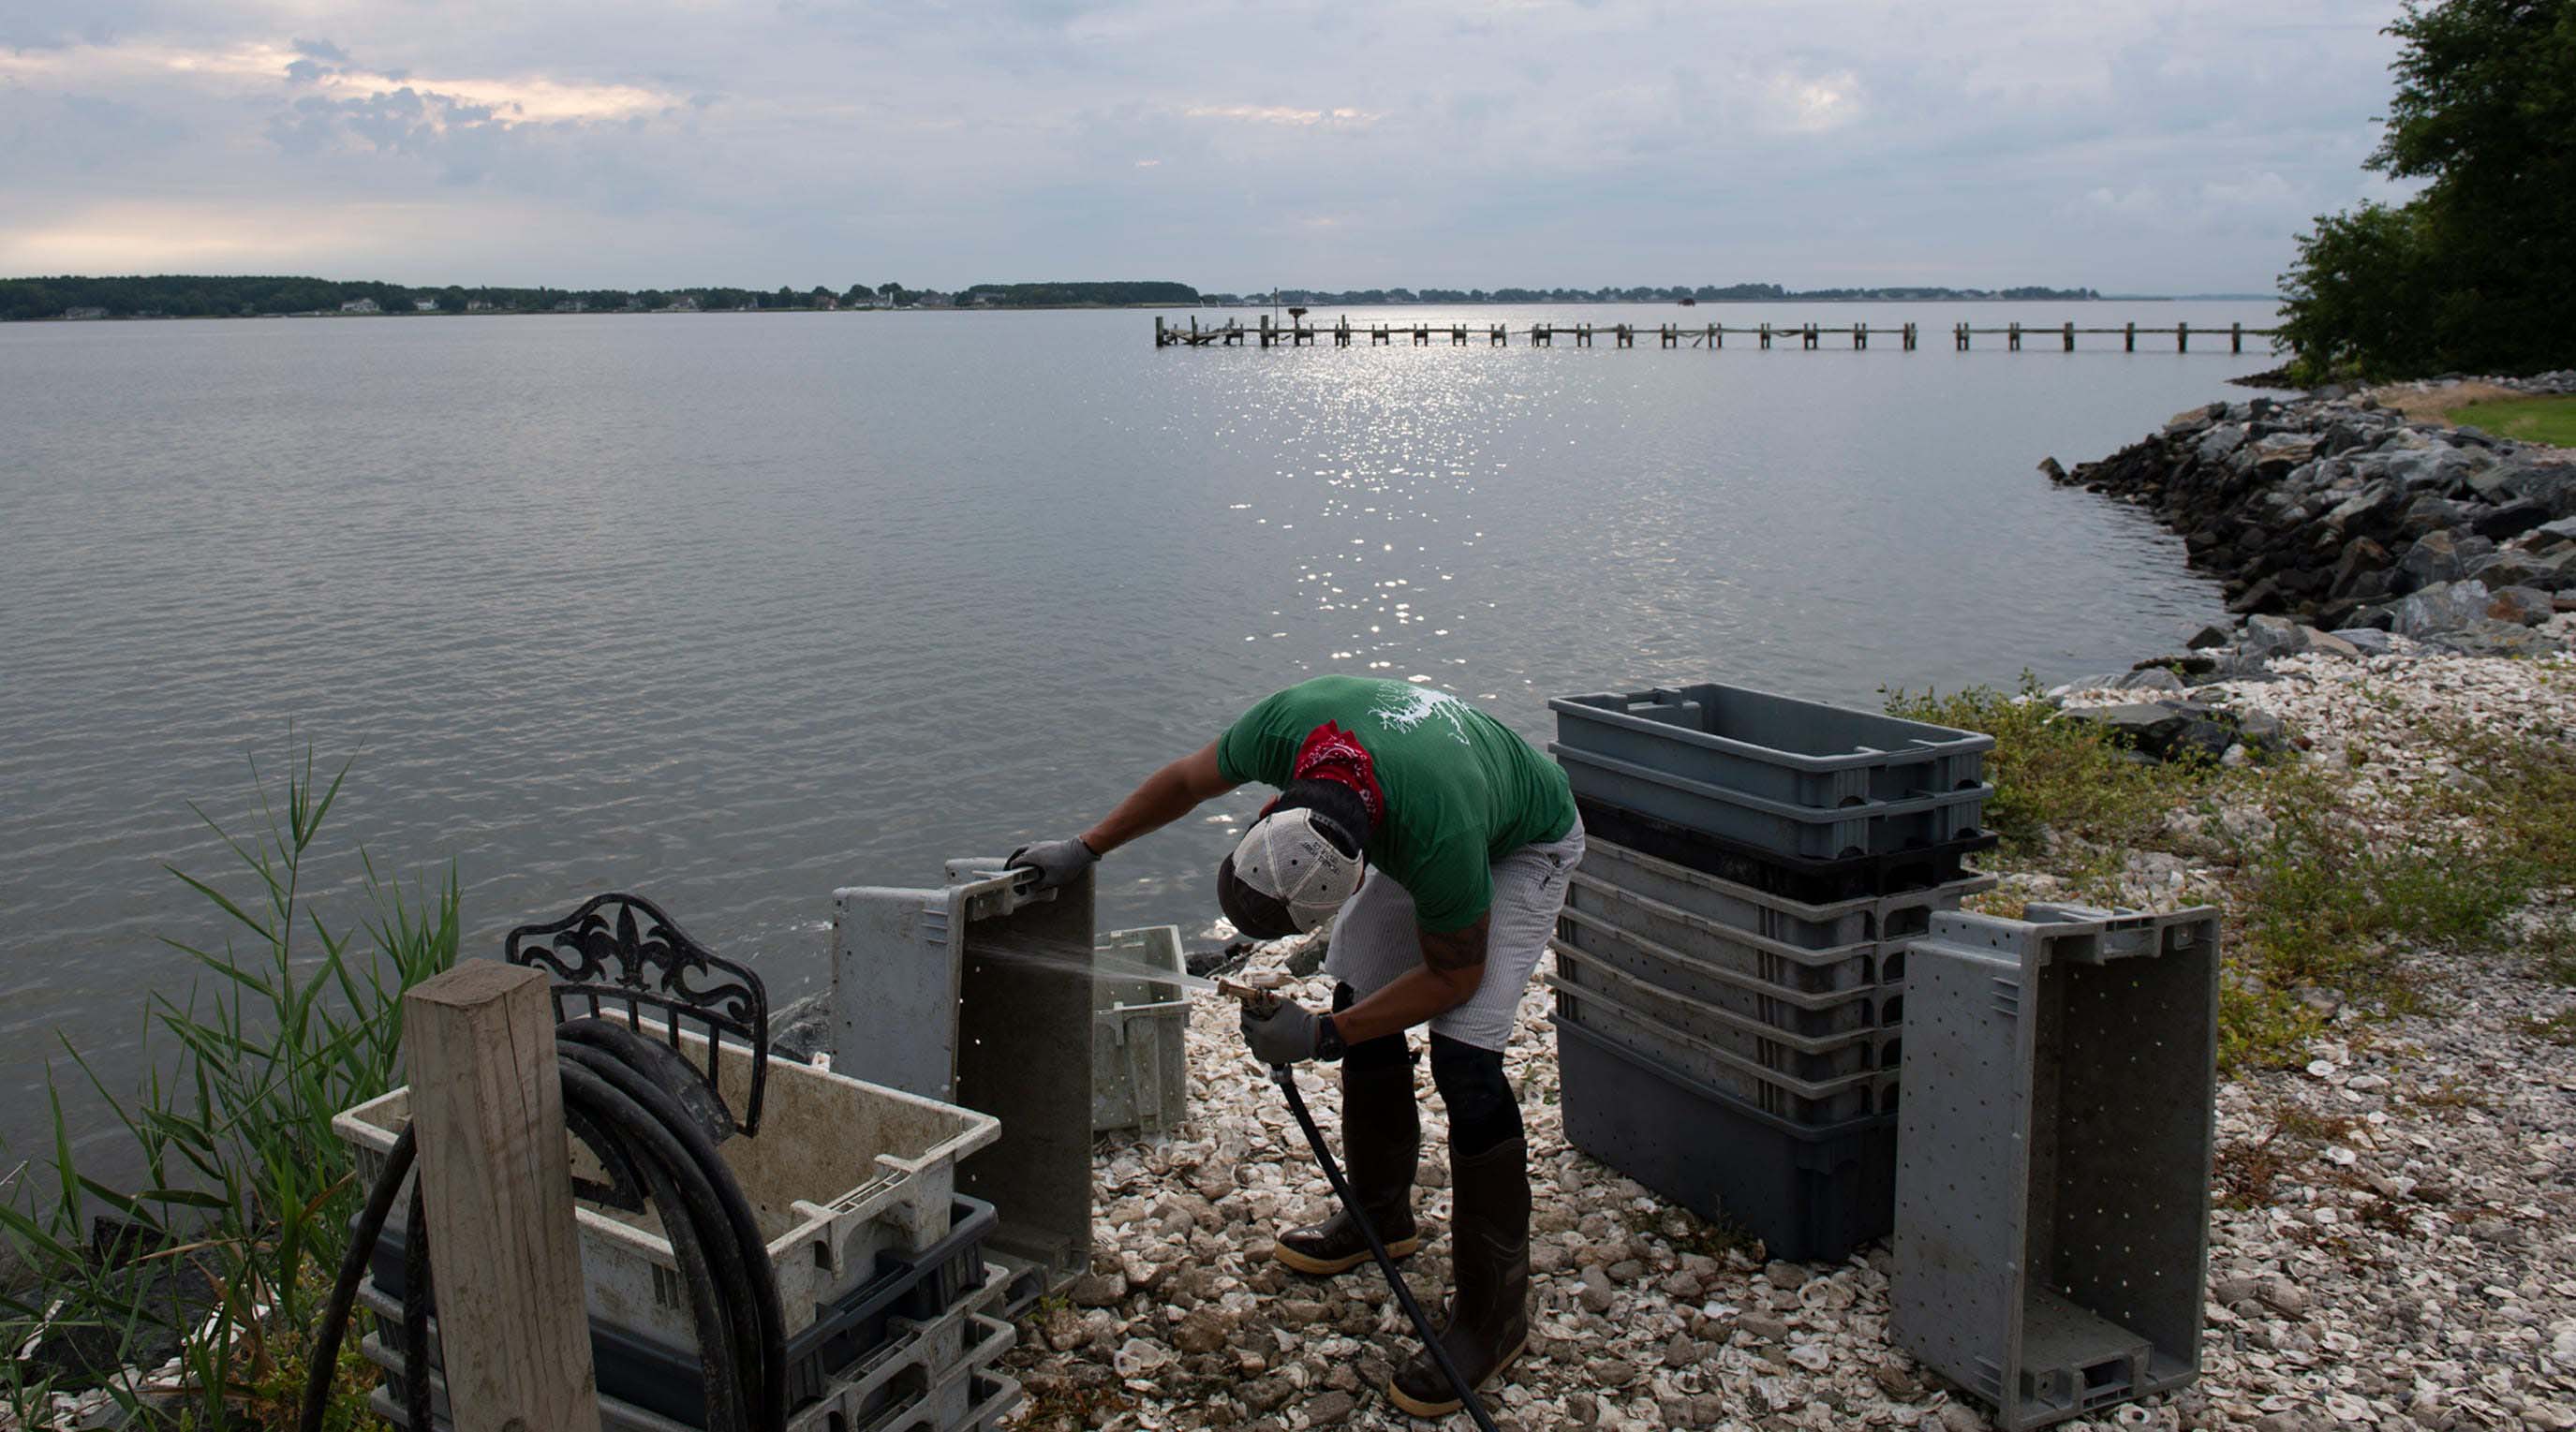 Scott Budden washes a bin by the dock on July 26, 2022. Today, his prize crop joins a growing list of natural tools to help the very waters that foster it. “Adding oysters can even help other interconnected habitats, like salt marsh and underwater seagrass — and together, these can increase the integrity and resilience of the coast by stabilizing shorelines to better withstand storms and storm surge," said Joseph Gordon, U.S. East Coast project director with Pew Charitable Trusts.